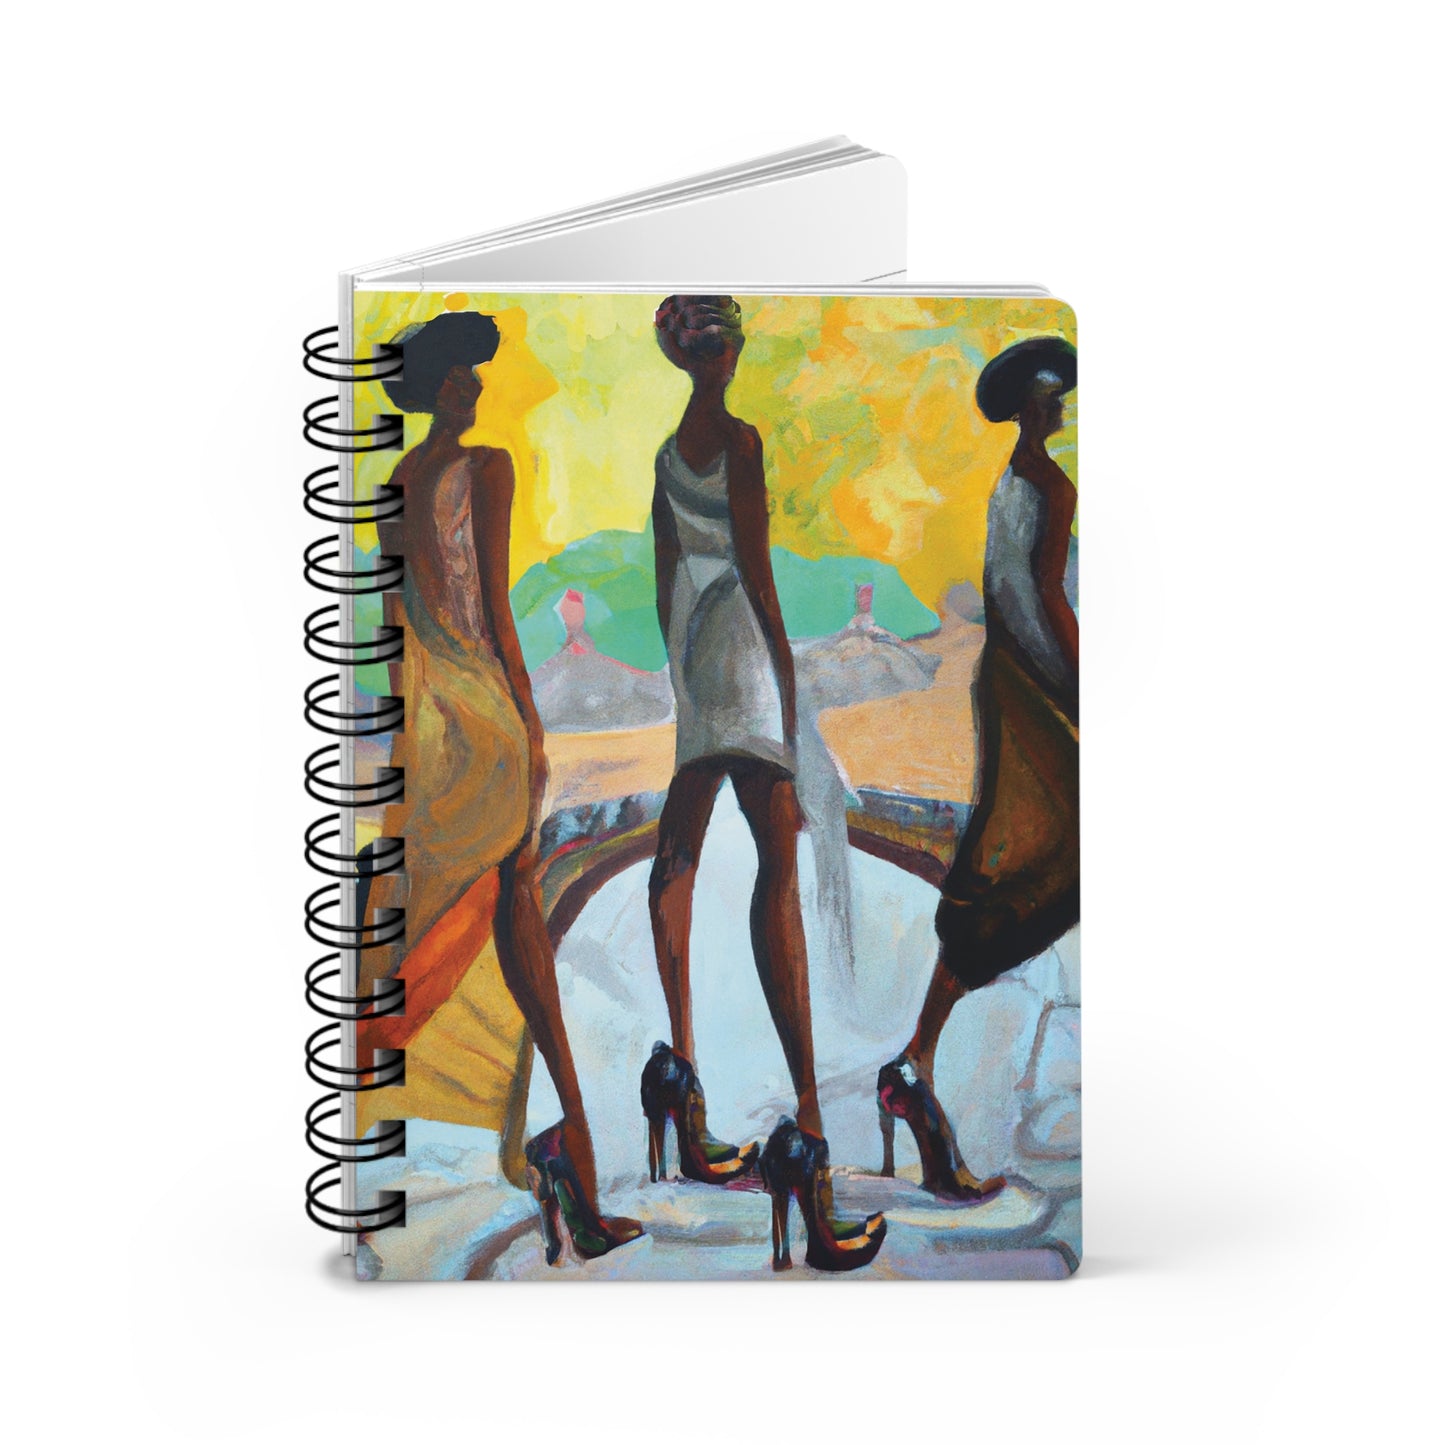 Silk Spiral Bound Notebooks and Journals with 2023-2024 Year-at-a-Glance Calendar